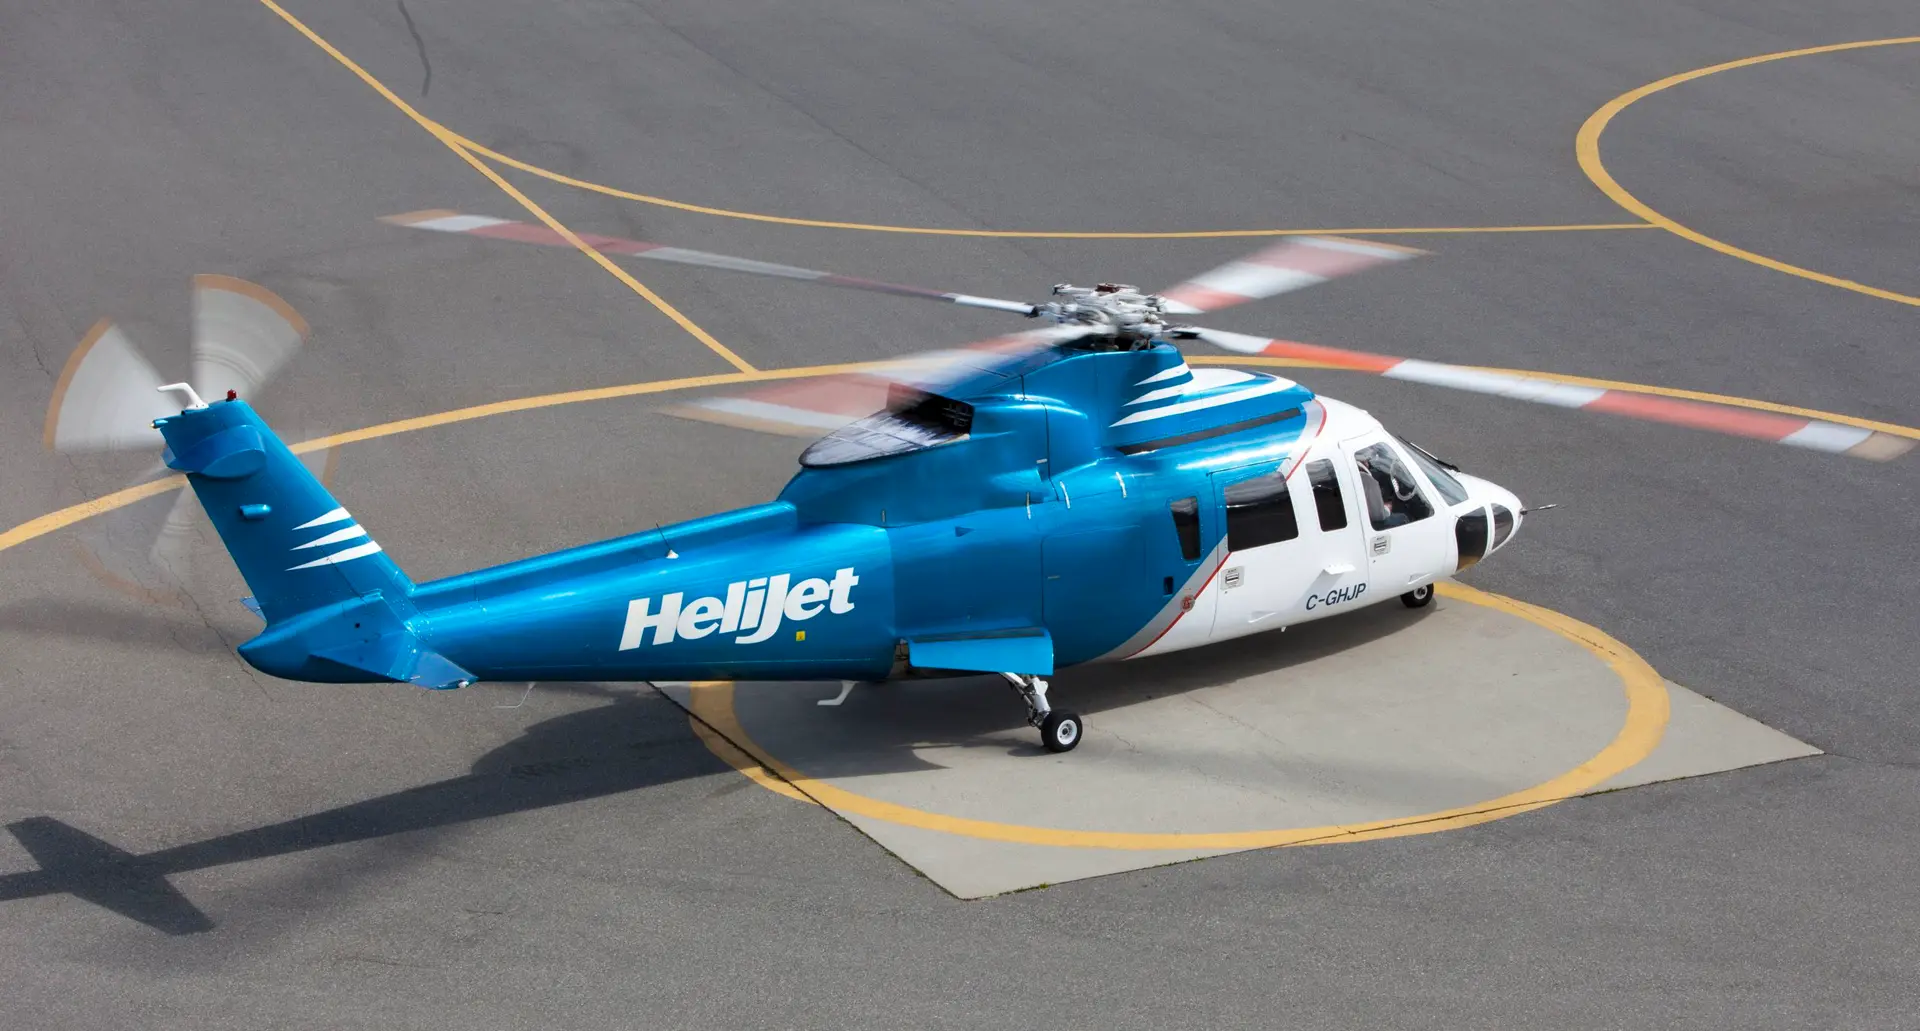 Helijet Sikorsky S76 Helicopter Prepares for Take-Off